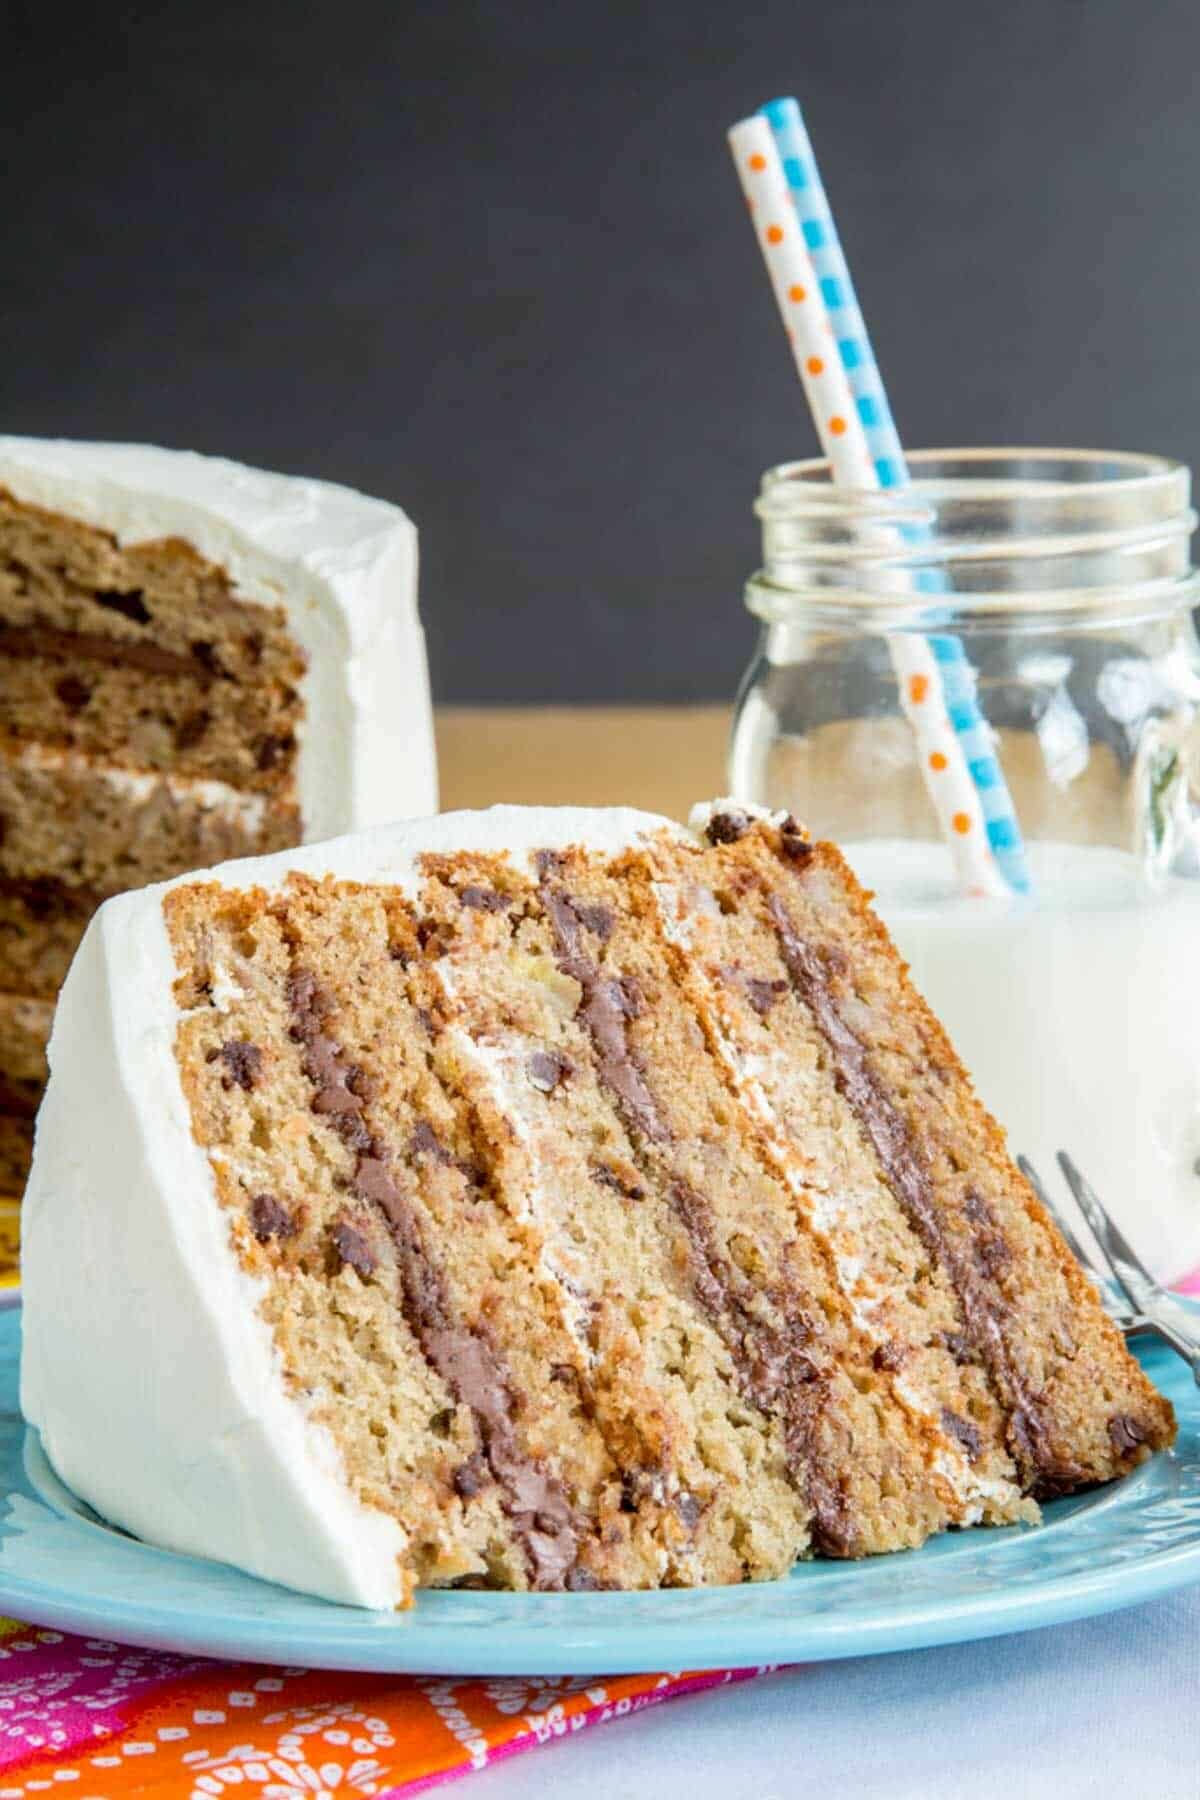 A slice of layered banana cake filled with Nutella and chocolate chips with a glass of milk in the background.